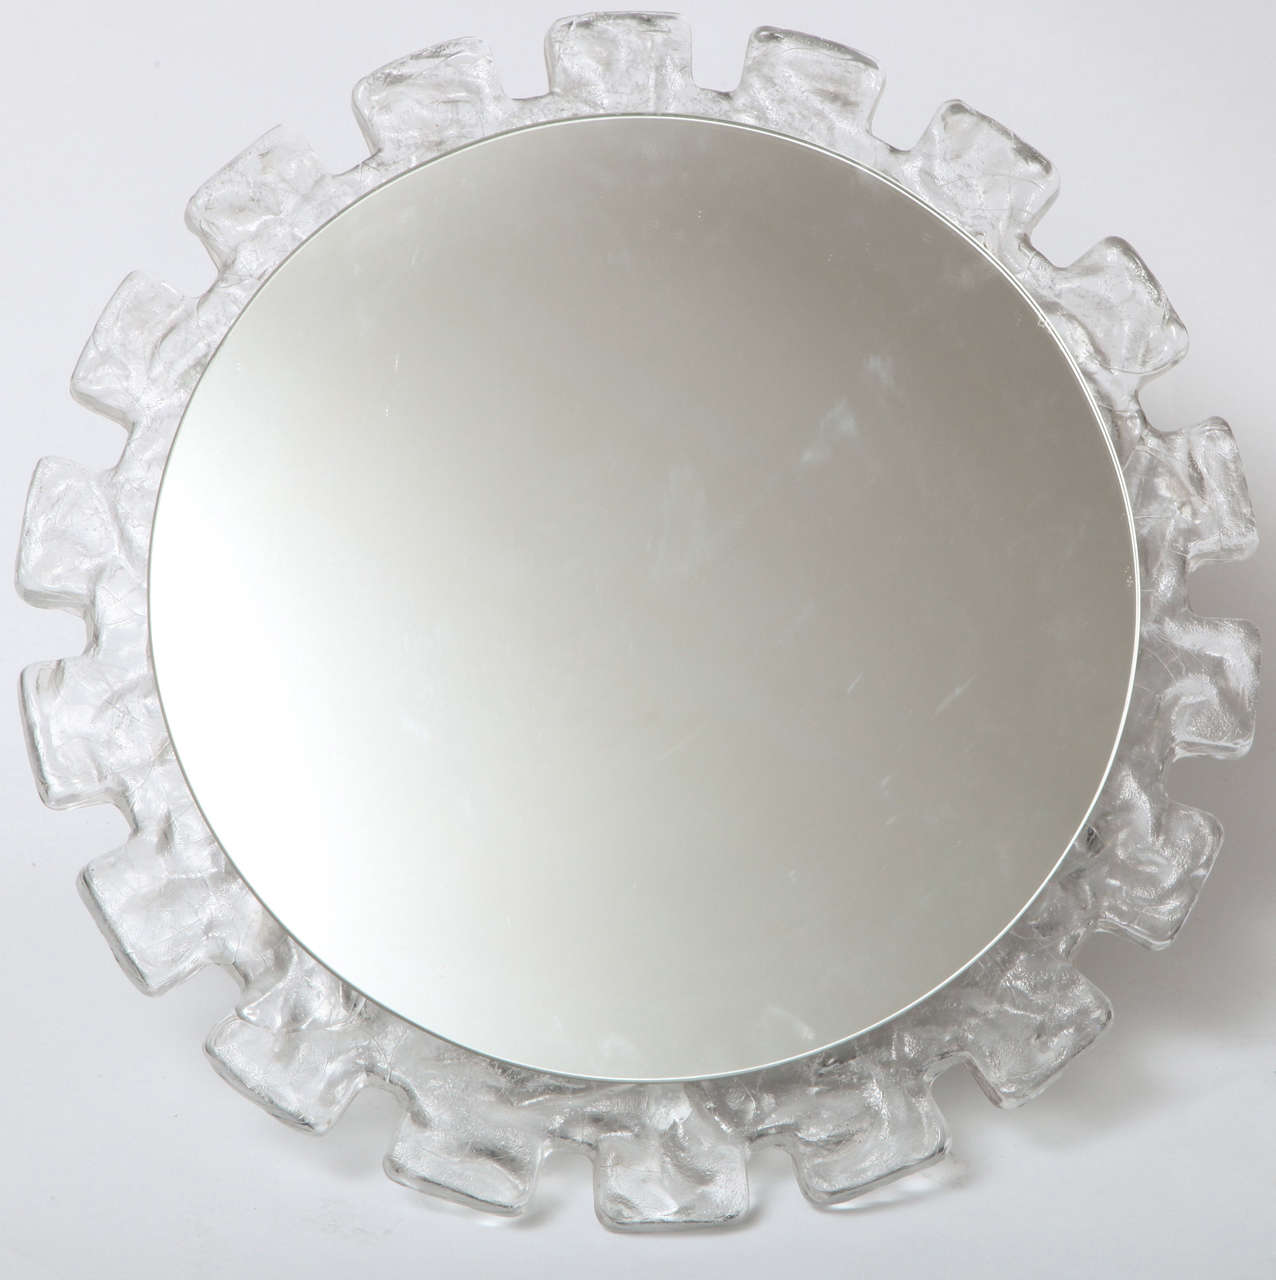 A great illuminated wall mirror with a curved molded resin frame.  Great for a powder room or entrance.